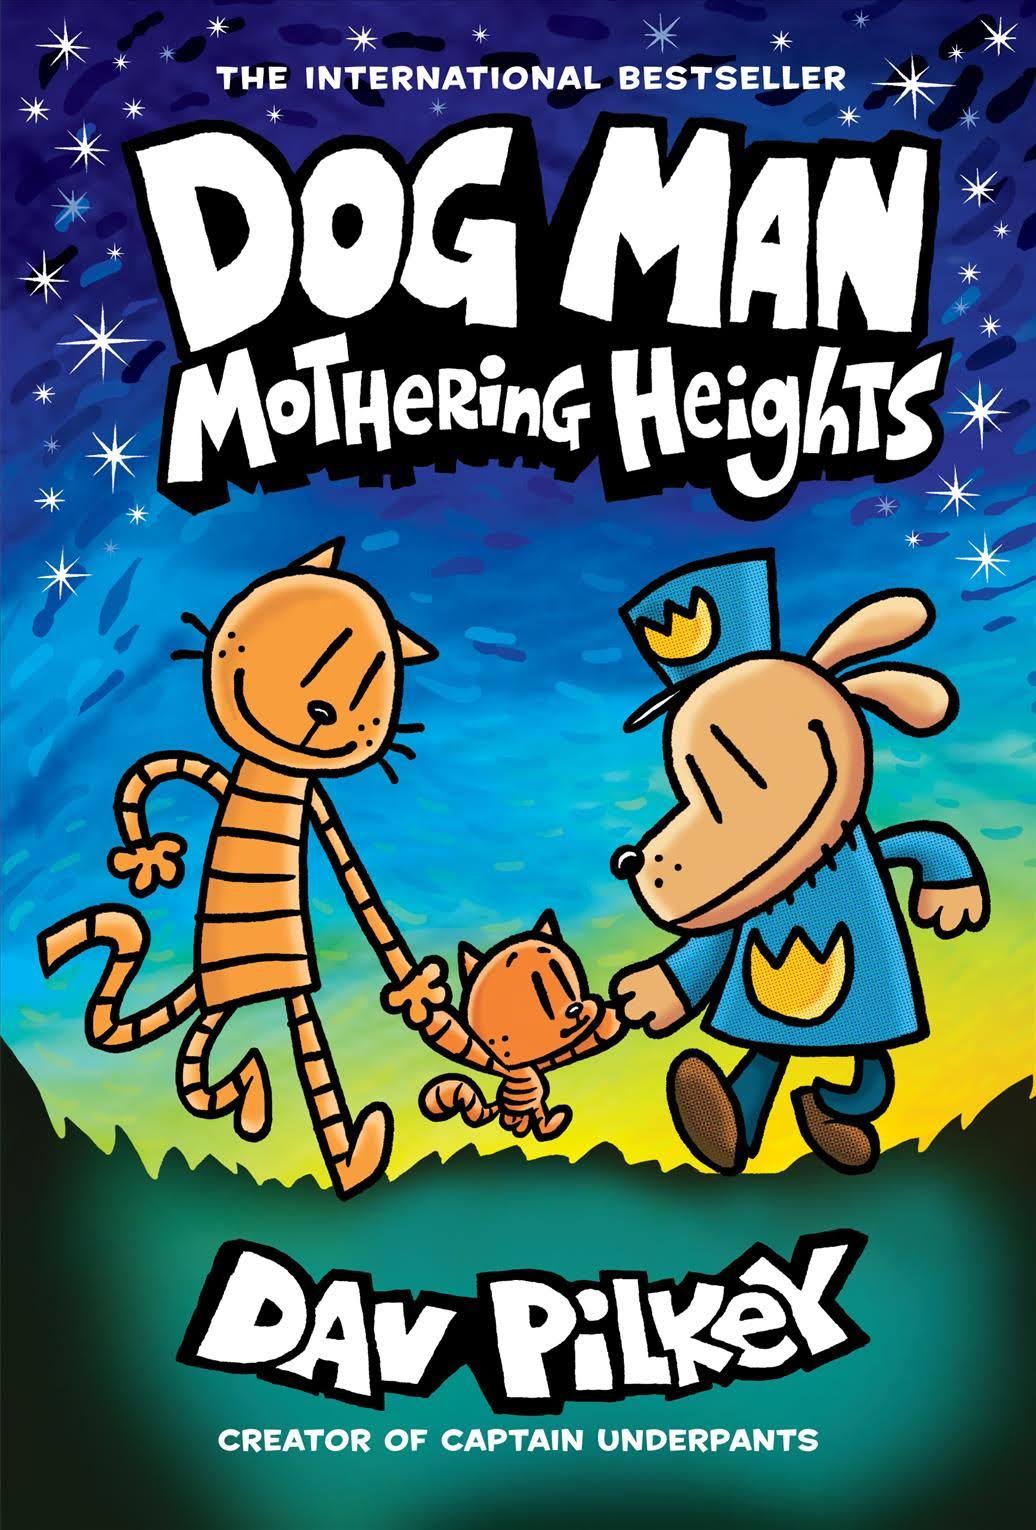 Dog Man: Mothering heights [Book]